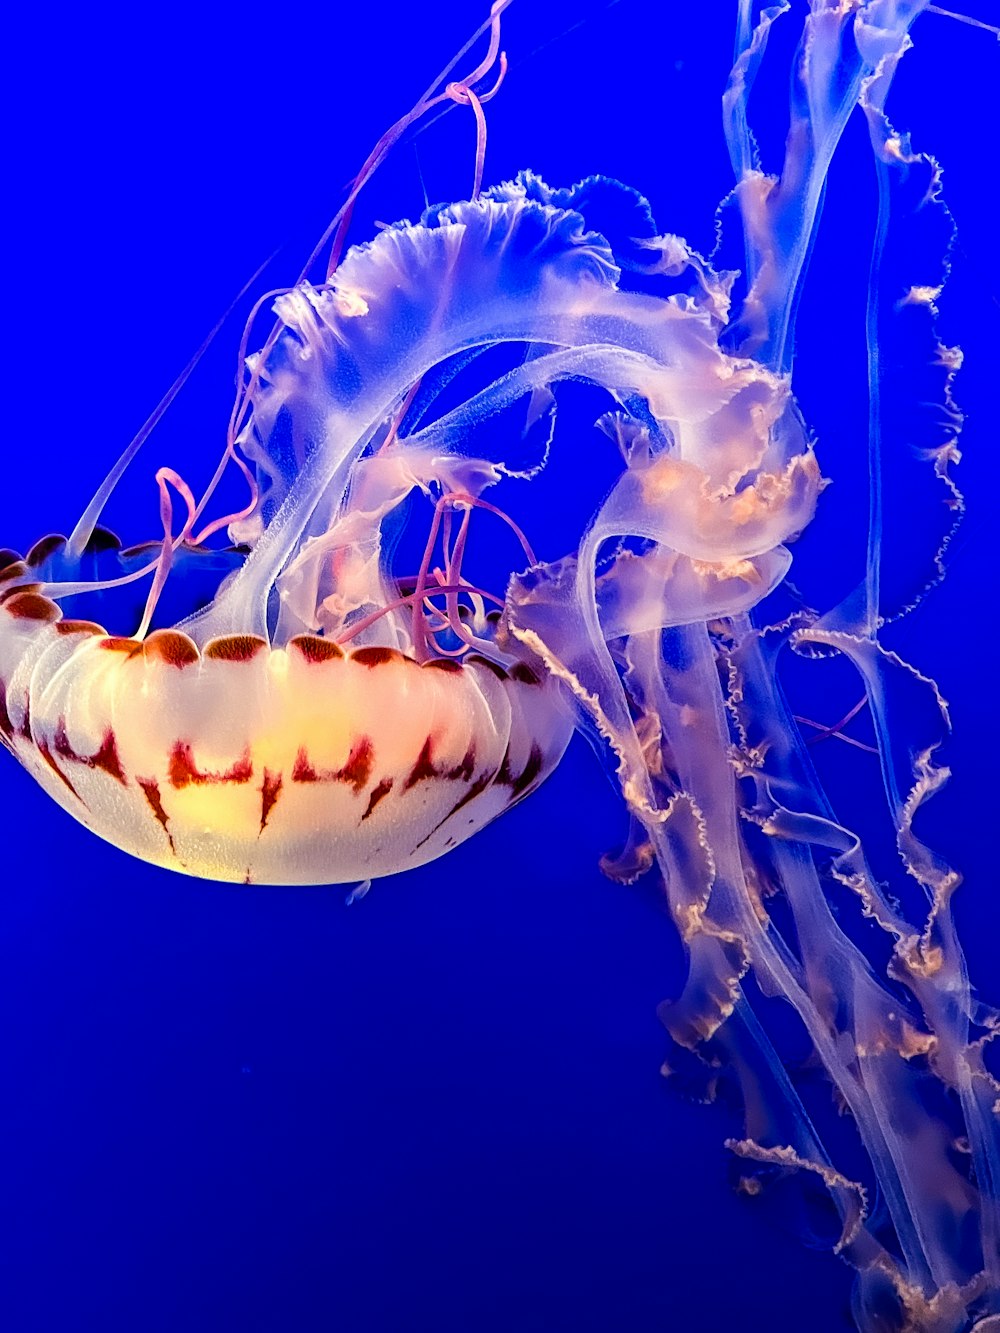 a jellyfish in the water